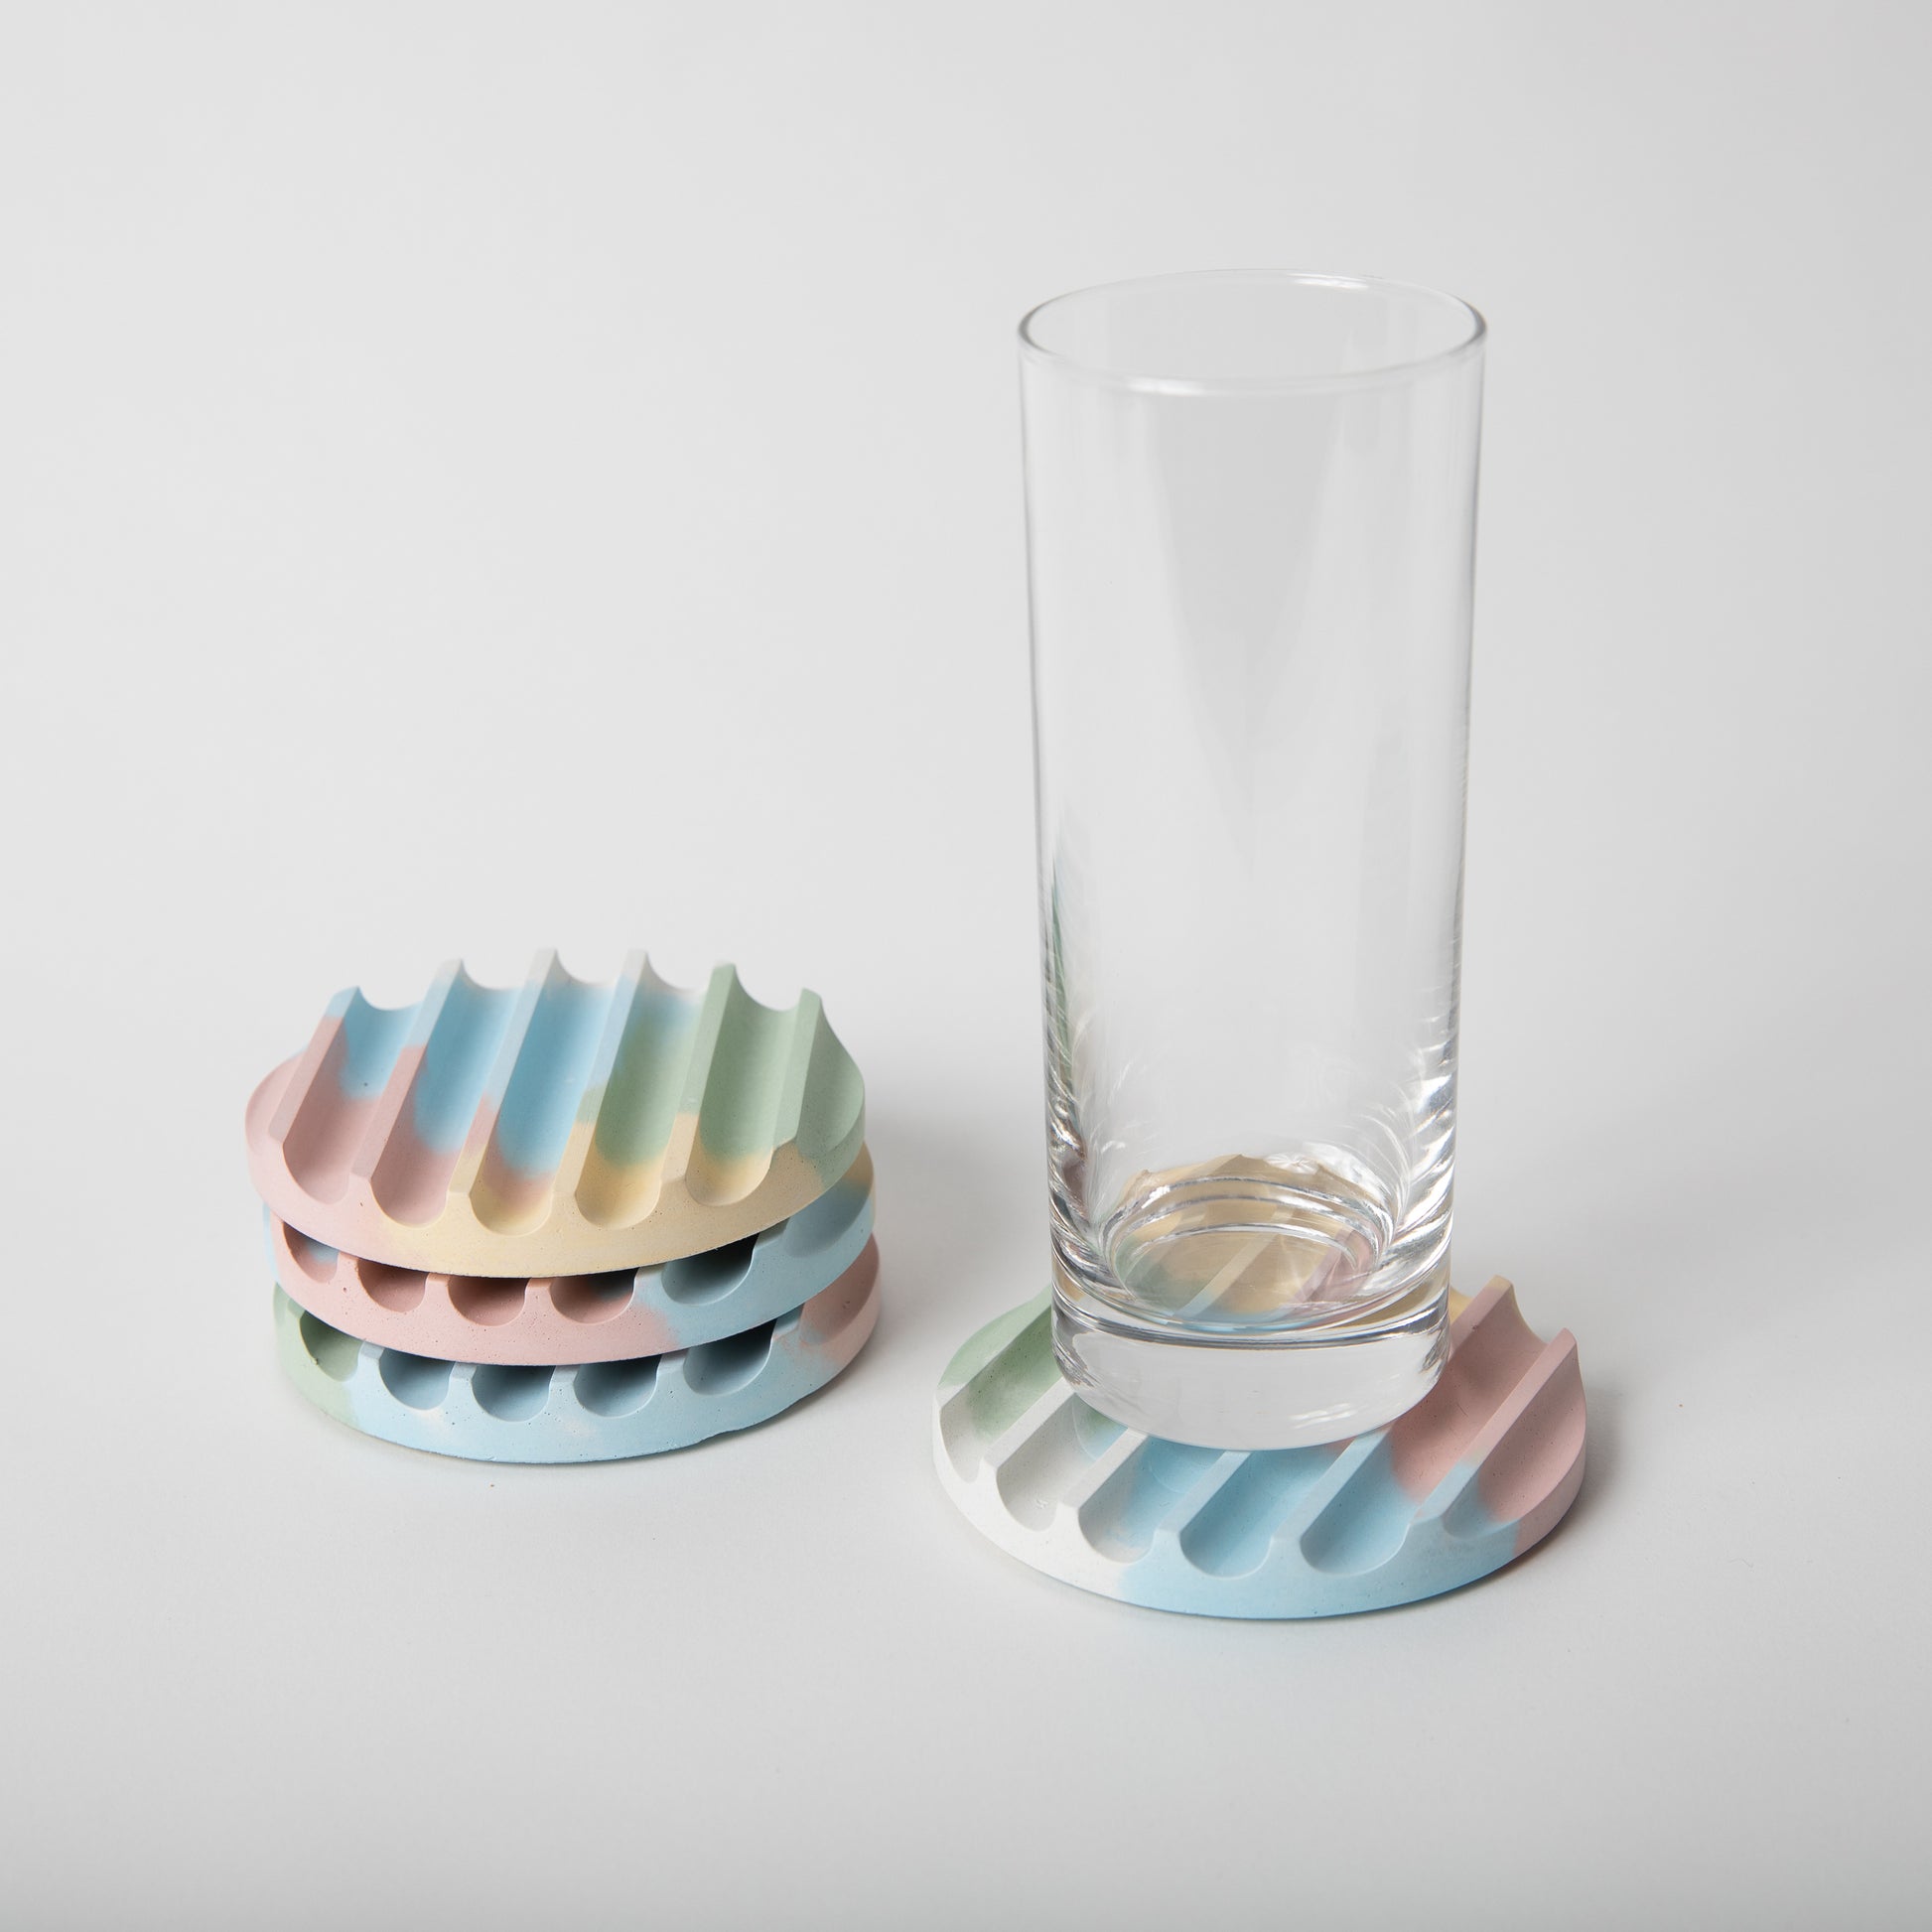 Concrete coaster set with cork base in jawbreaker (multicolor) shown with glass.